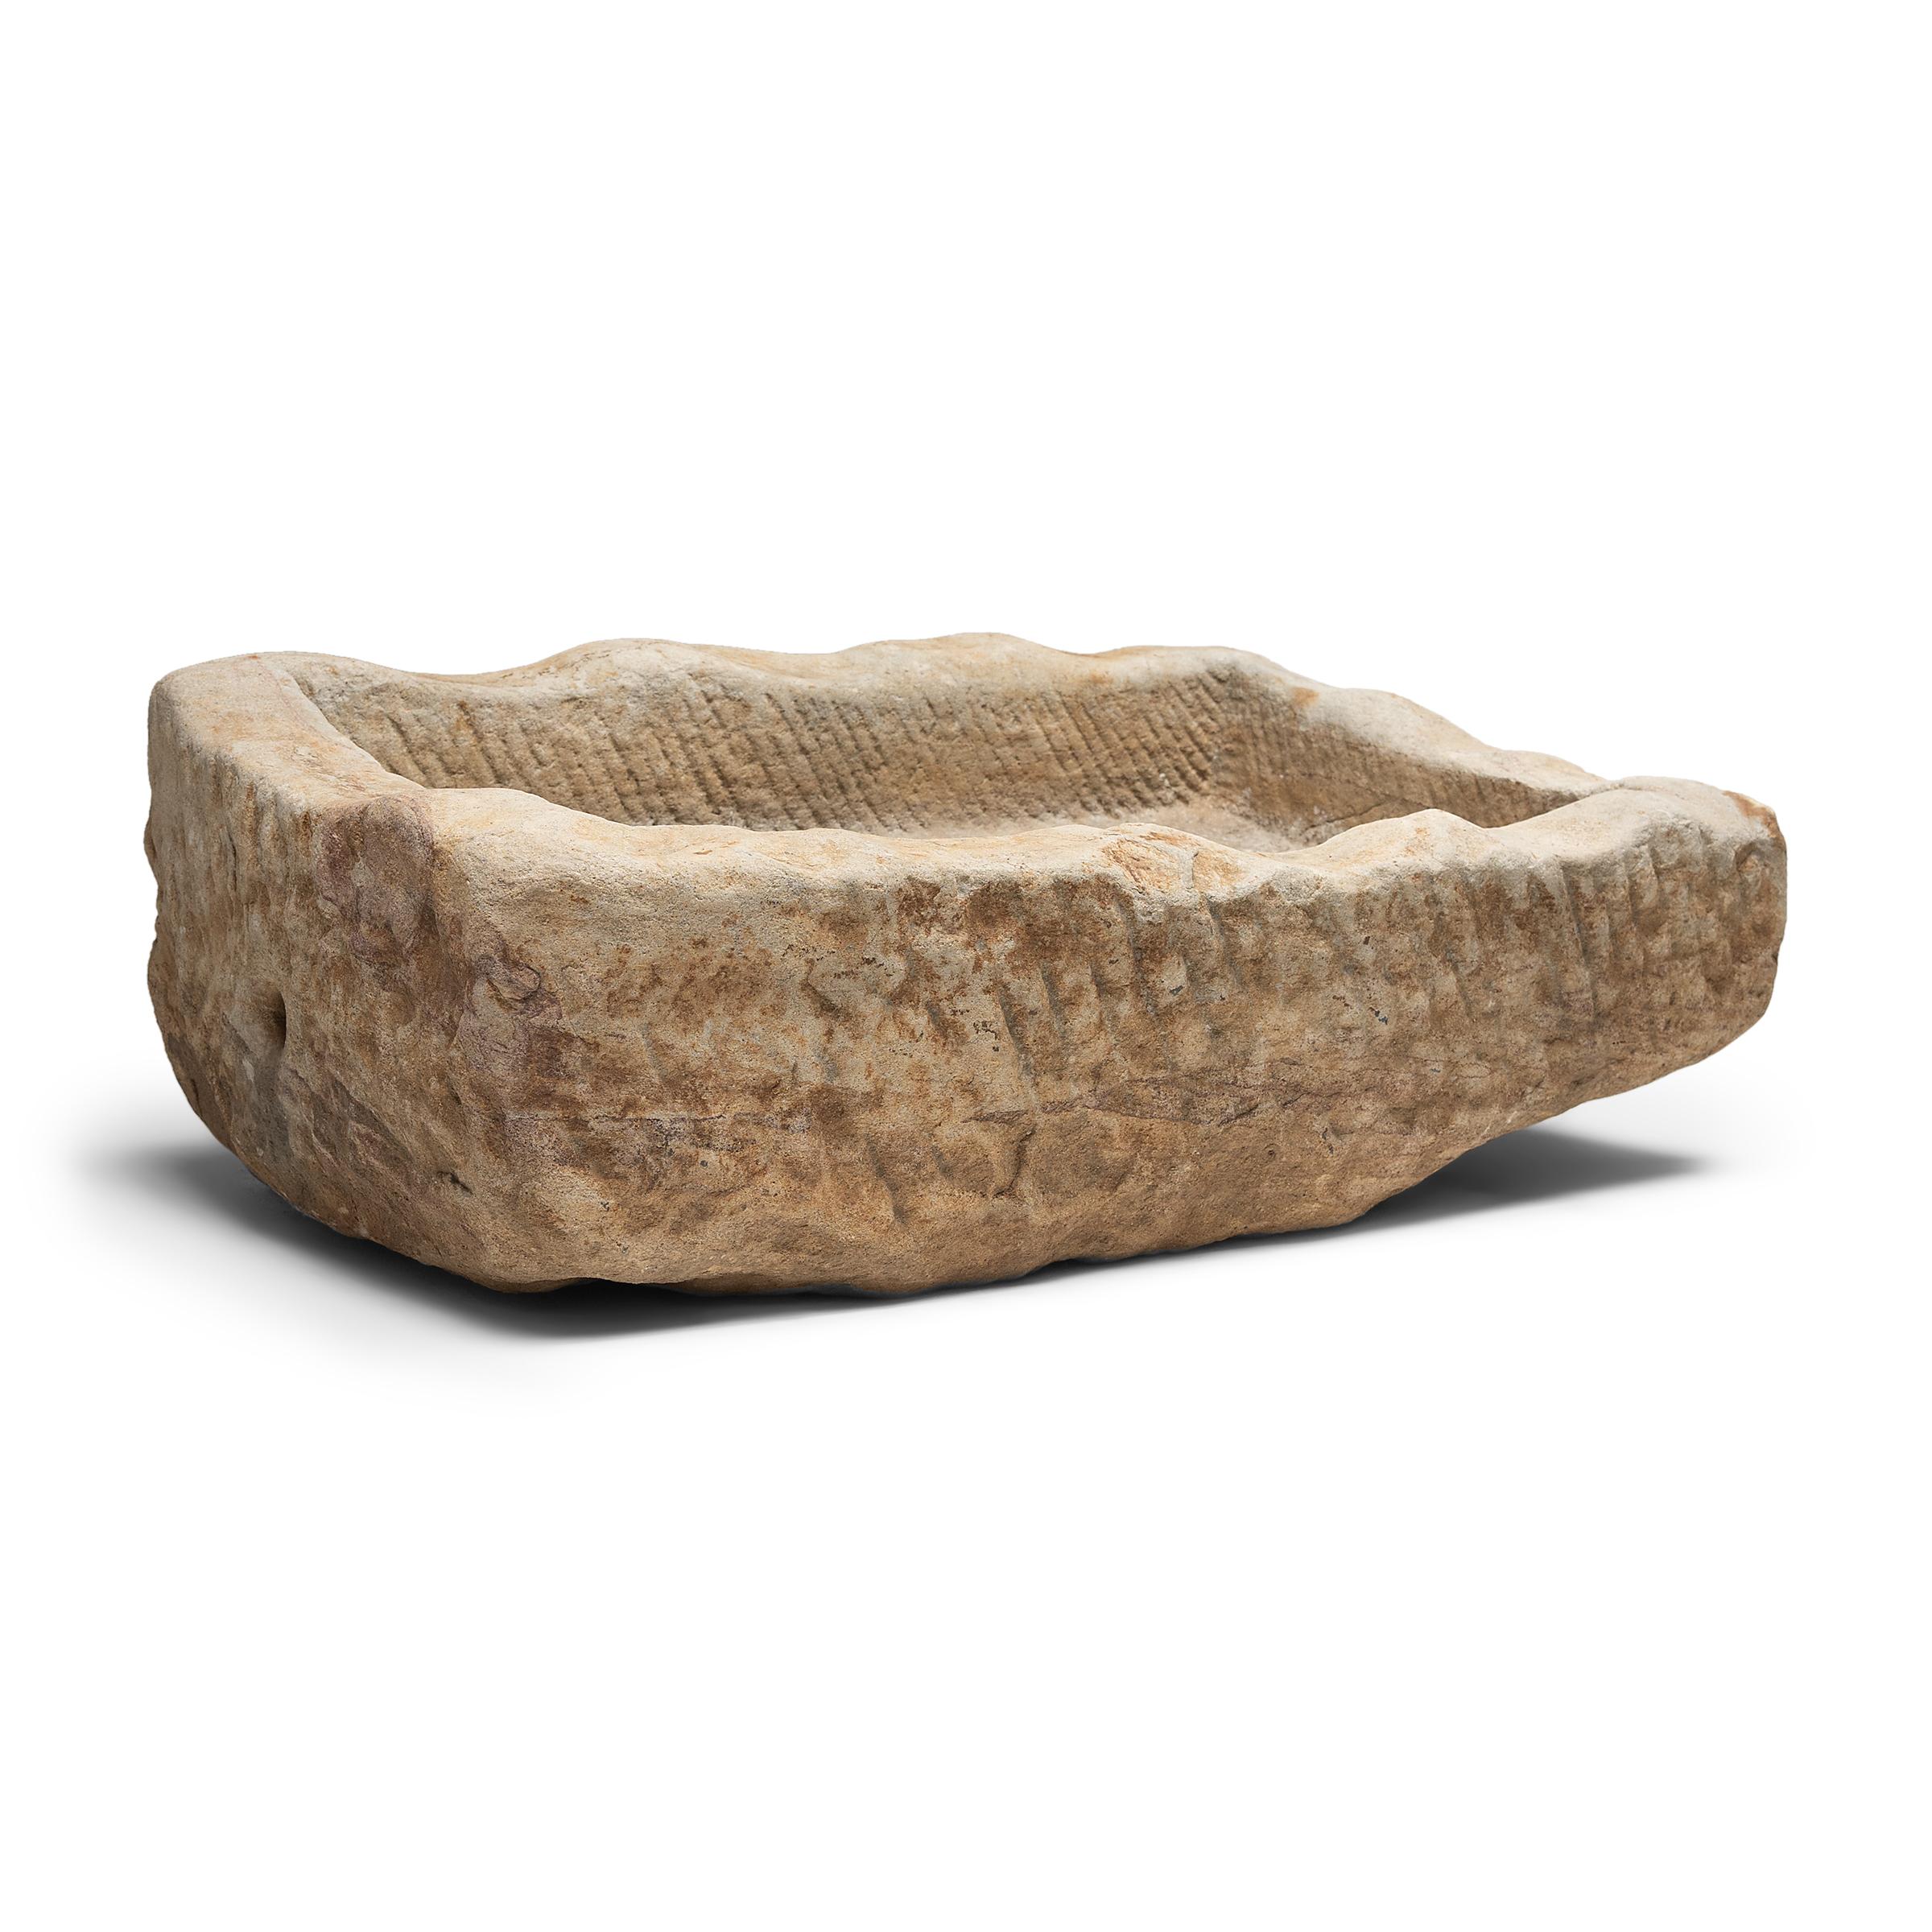 Once used on a Provincial Chinese farm to hold water or animal feed, this early 20th century stone trough is celebrated today for its organic form and rustic authenticity. hand carved from solid limestone, this shallow rectangular trough exists on a